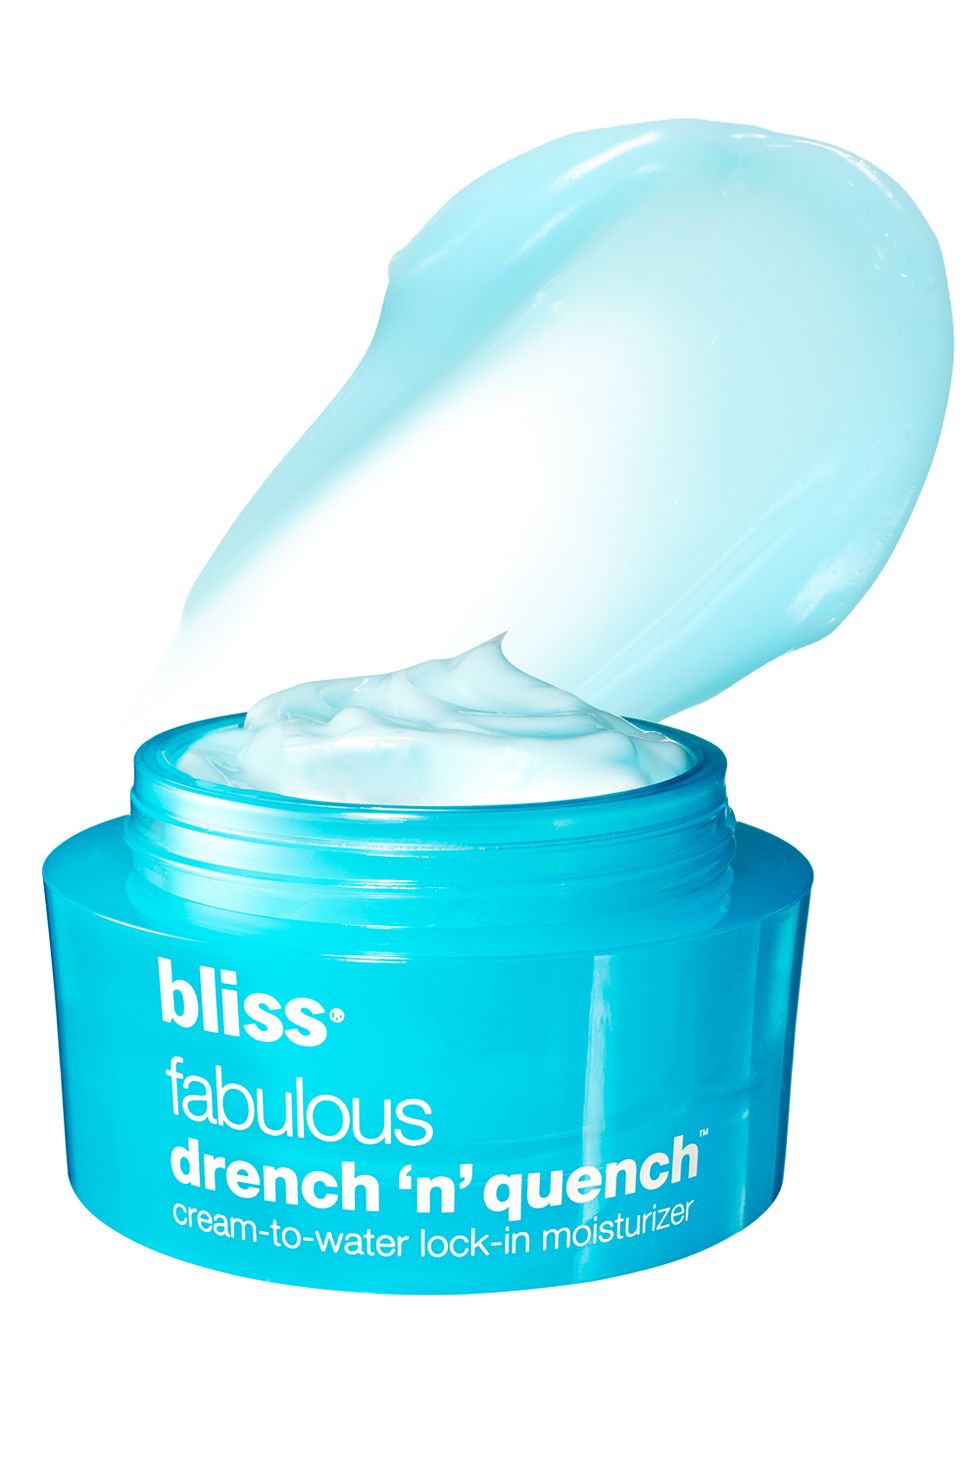 <p>For seriously parched skin, massage in <a href="https://www.blissworld.com/bliss-products/skin-care/bliss-fabulous-drench-n-quench" target="_blank">Bliss Fabulous Drench 'n' Quench cream-to-water formula</a> ($38), which transforms upon application.</p>